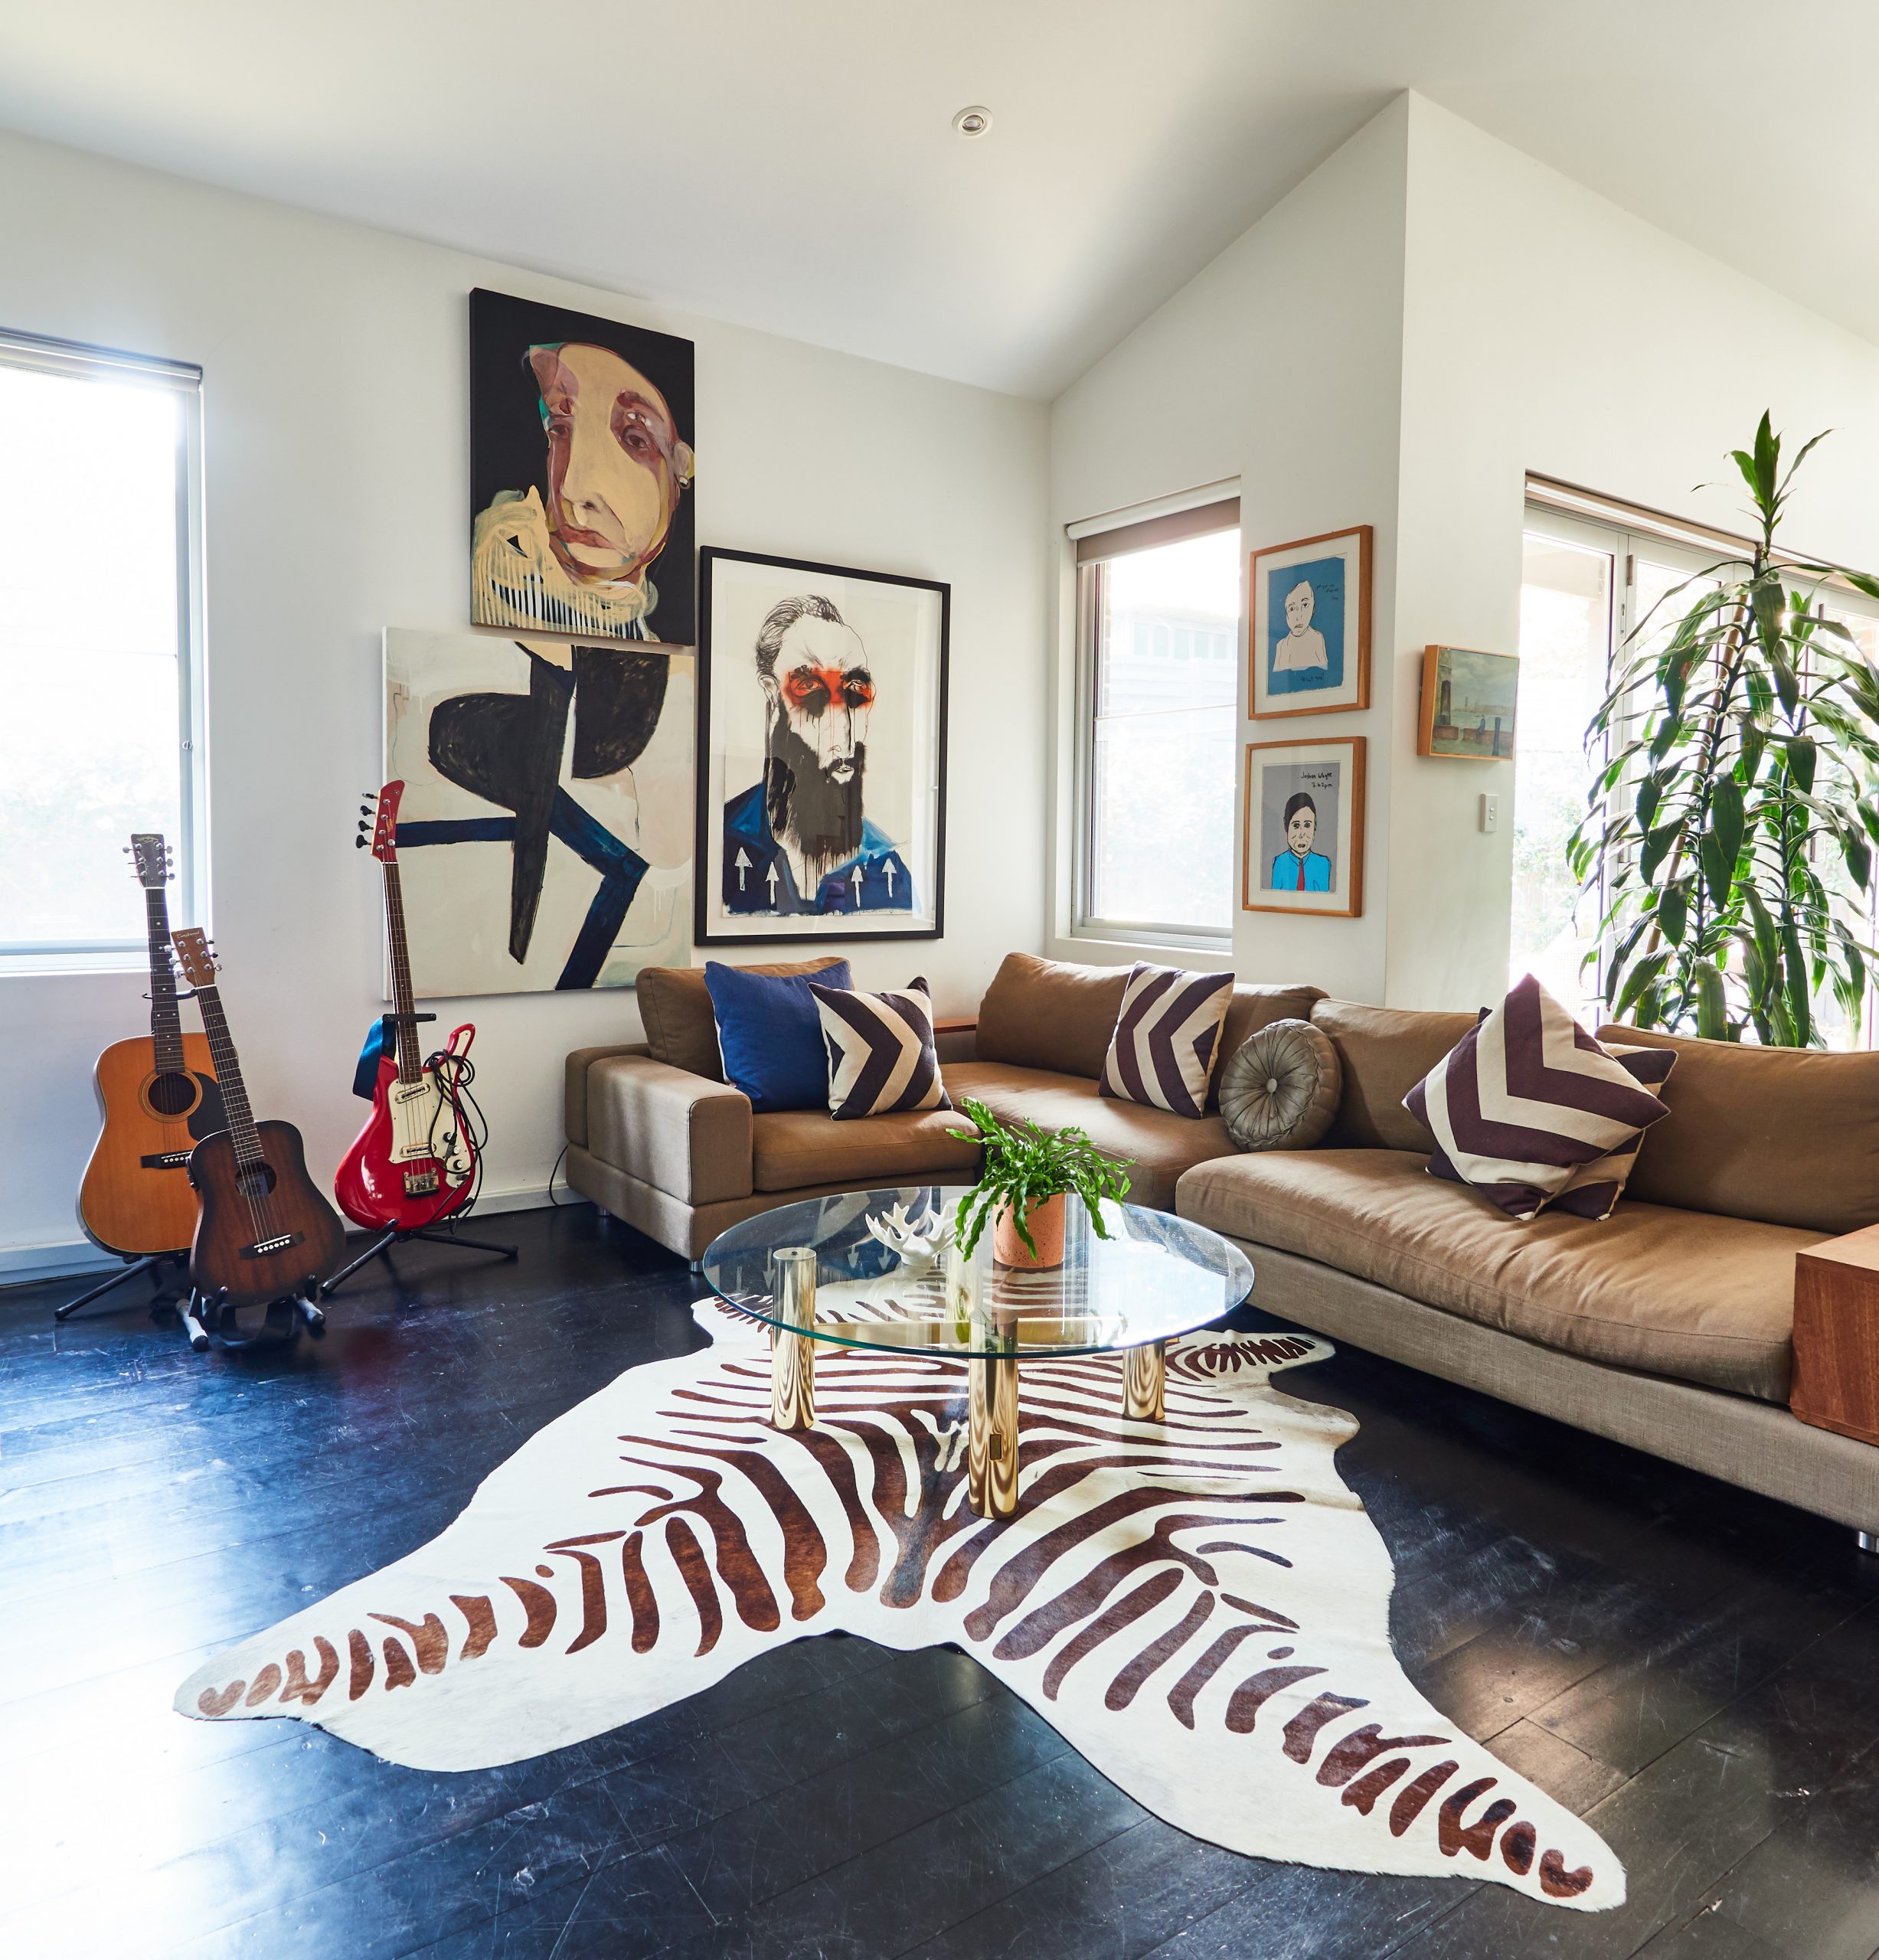 Eclectic living room with guitars, animal rug, plant and multiple artworks